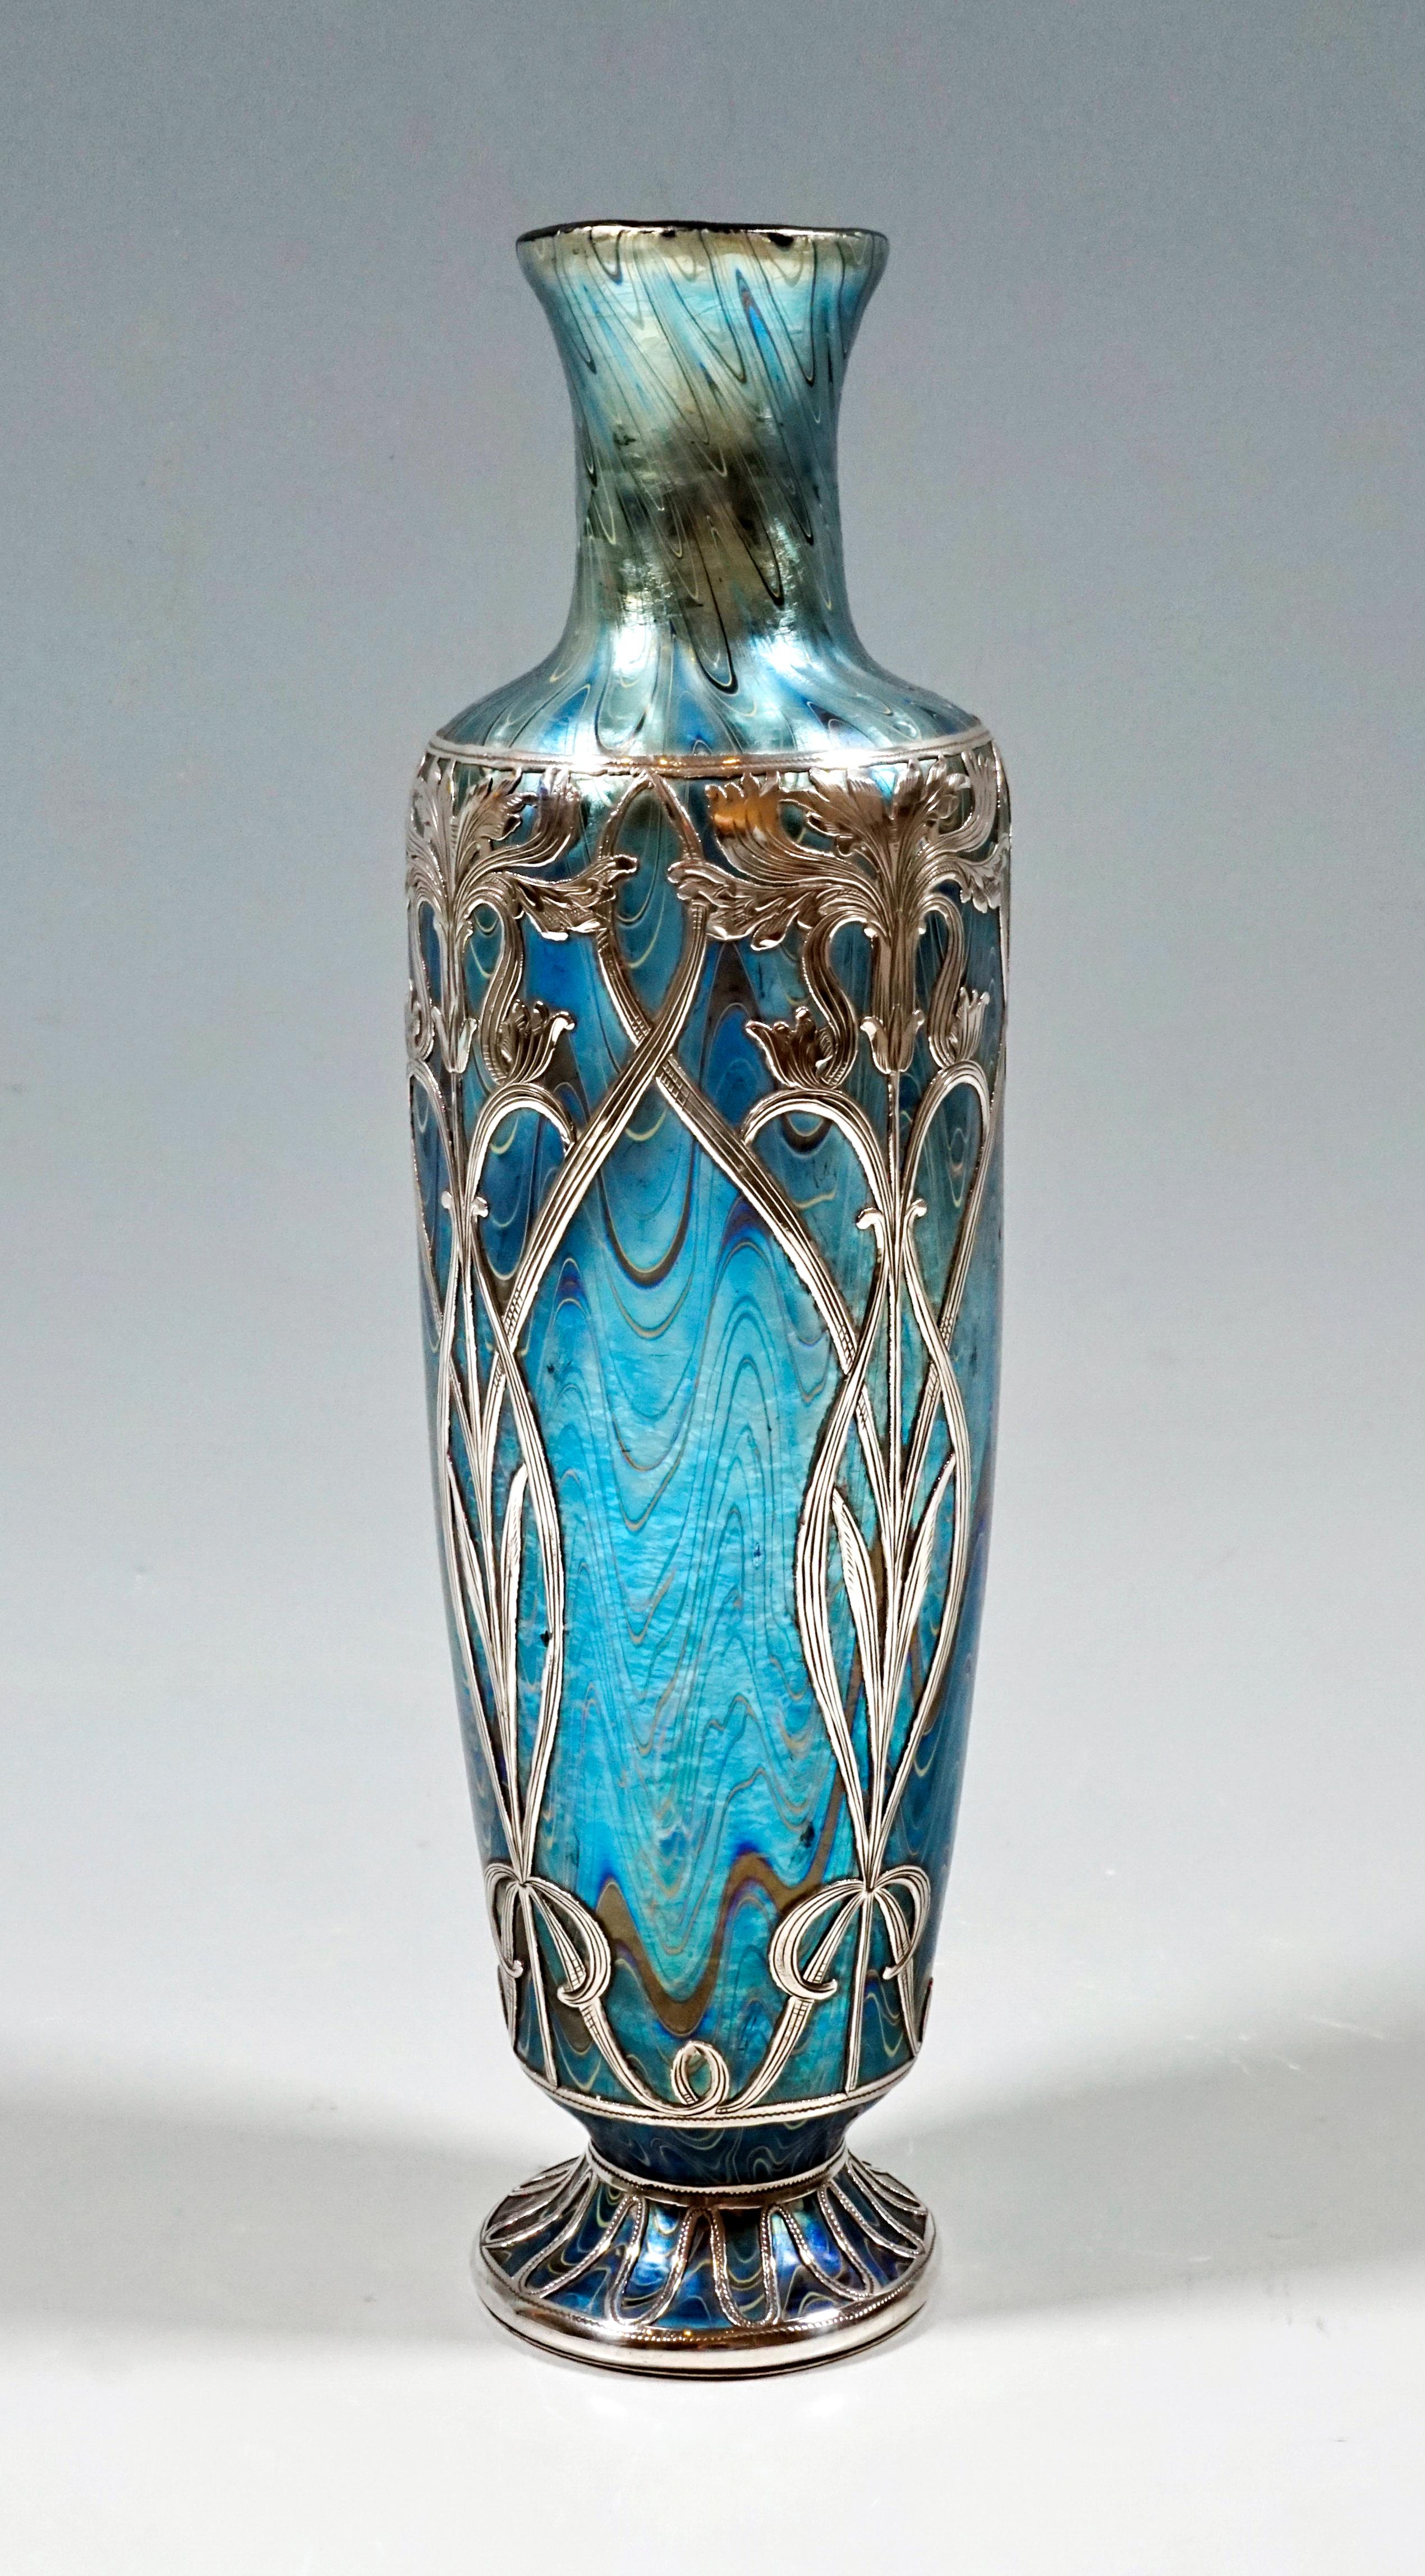 Finest Bohemian Art Nouveau glass vase
Blown into the form of a baluster-shaped body with an offset neck and a flared mouth rim, based on a round, offset base.

Shape: Series I, Prod. nr. - PN 7968, year 1899

Decor: Phenomenon Genre - PG 6893